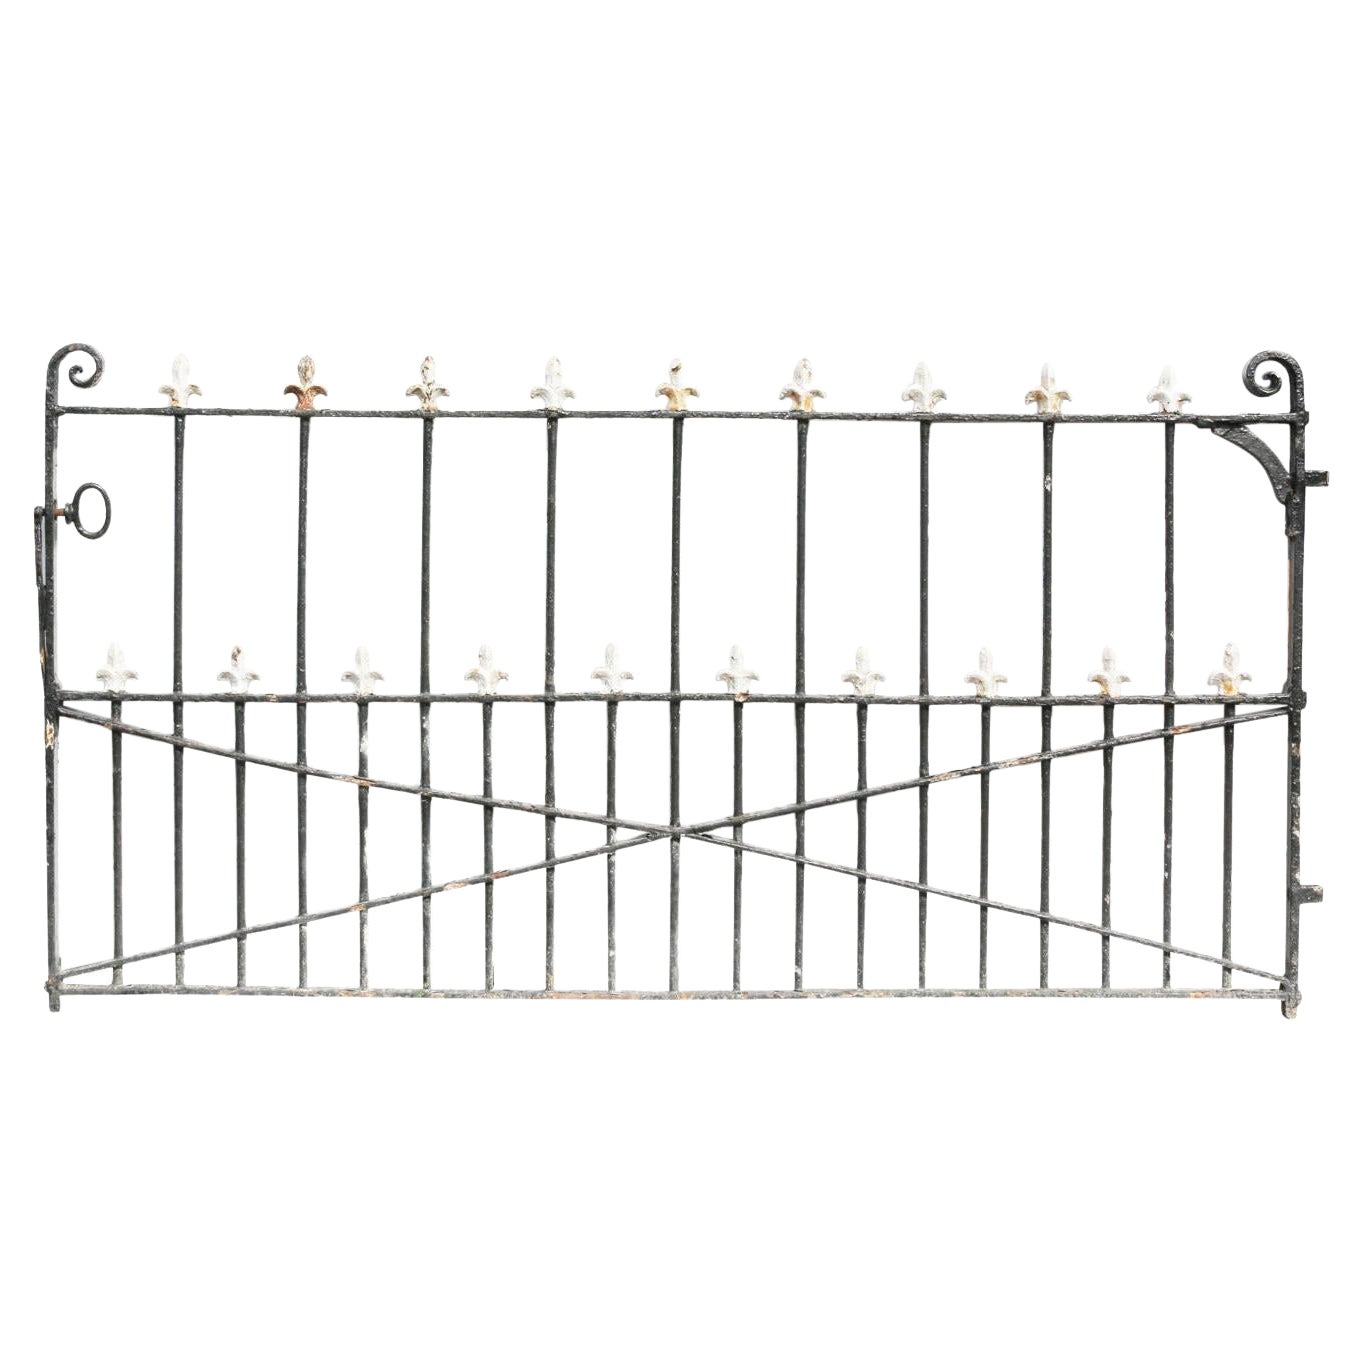 Antique Wrought Iron Entry Gate